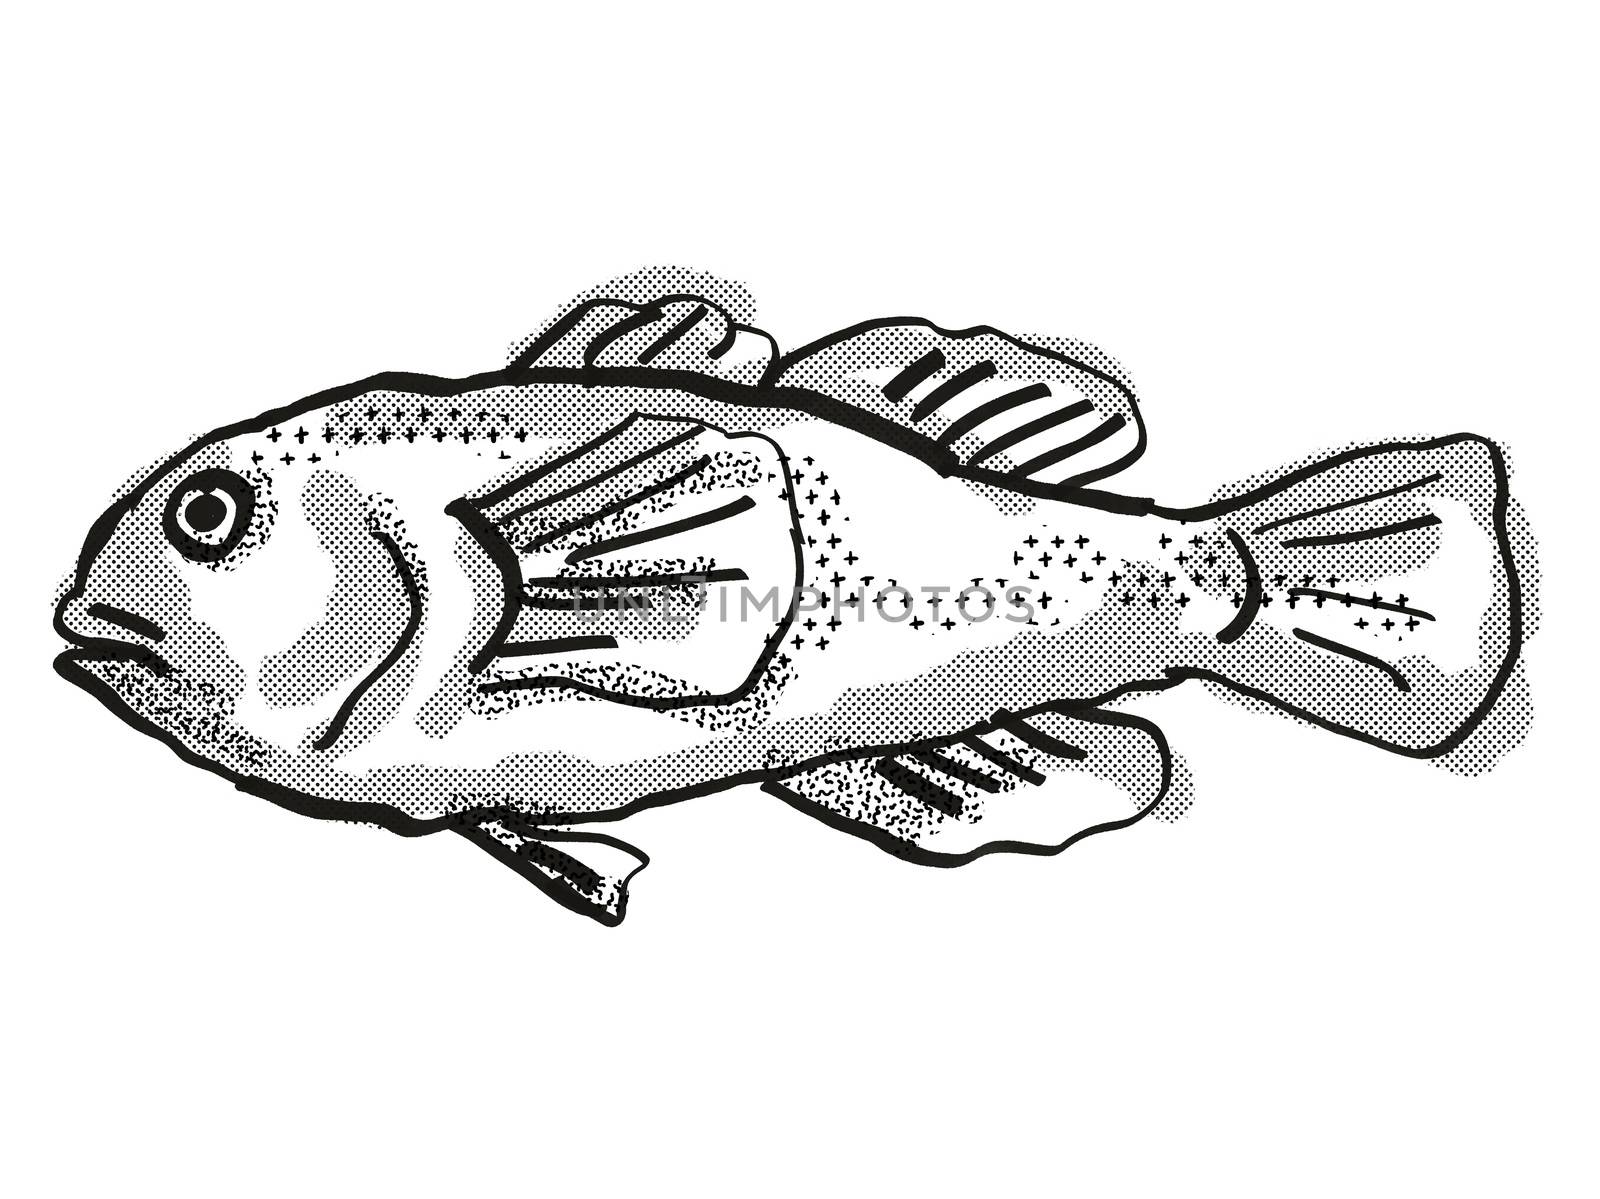 Retro cartoon style drawing of a Plain Coralgoby  , a native Australian marine life species viewed from side on isolated white background done in black and white.